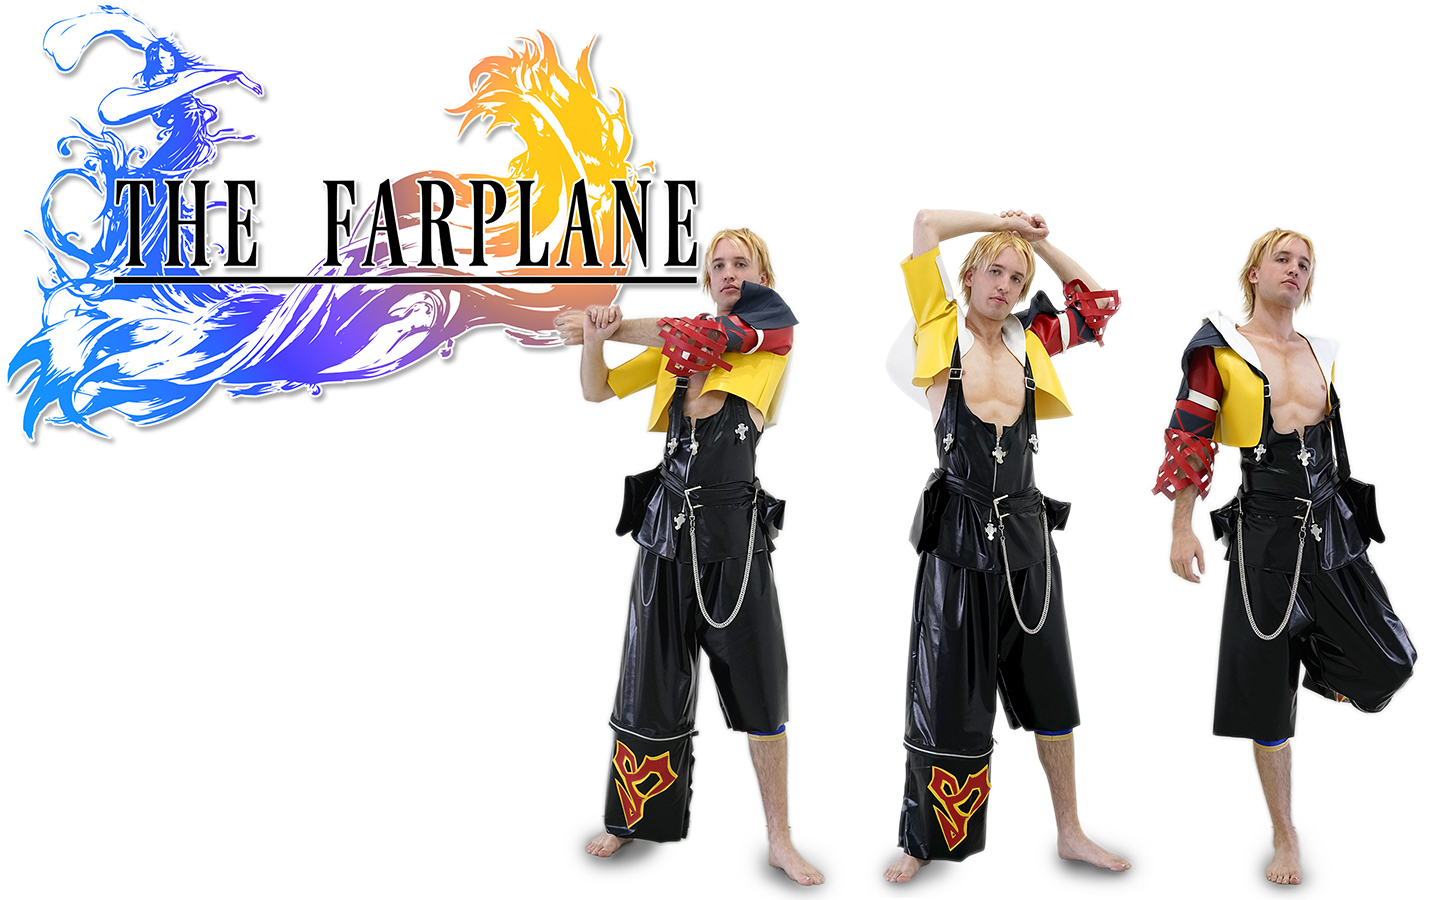 Jesse dressed as Tidus from Final Fantasy 10 in various stretching poses with text that reads 'The Farplane'